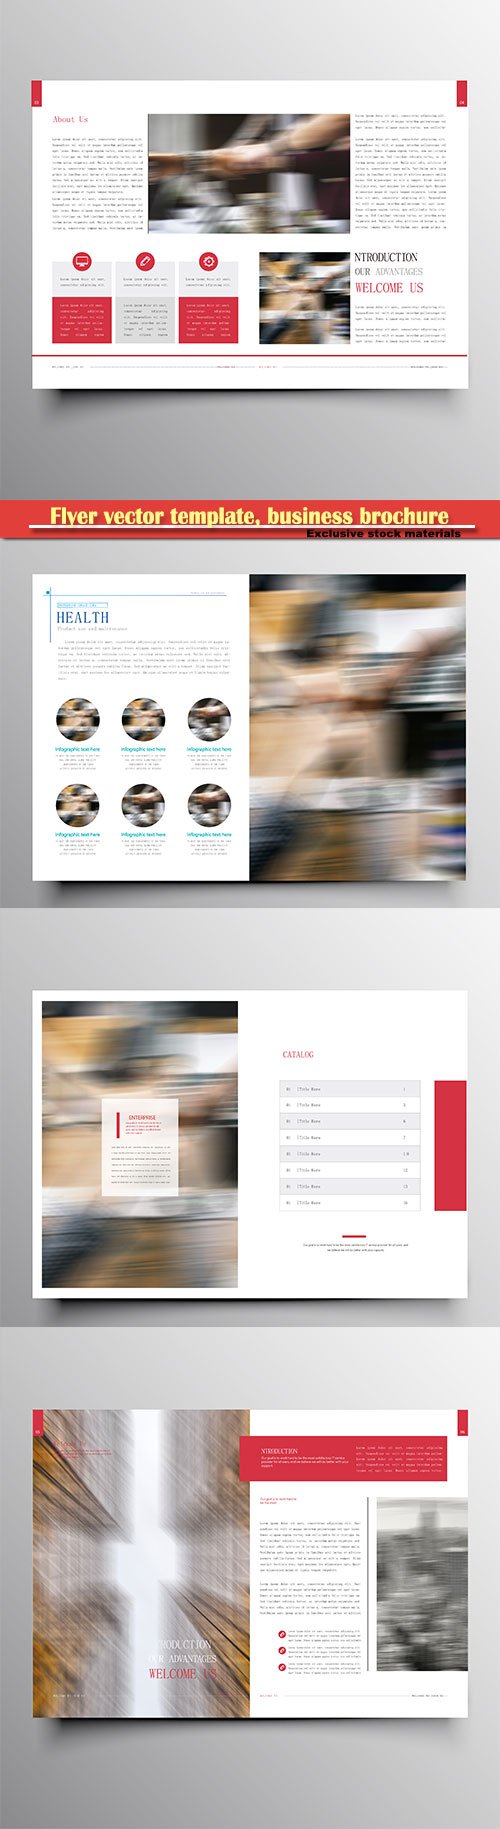 Flyer vector template, business brochure, magazine cover # 32